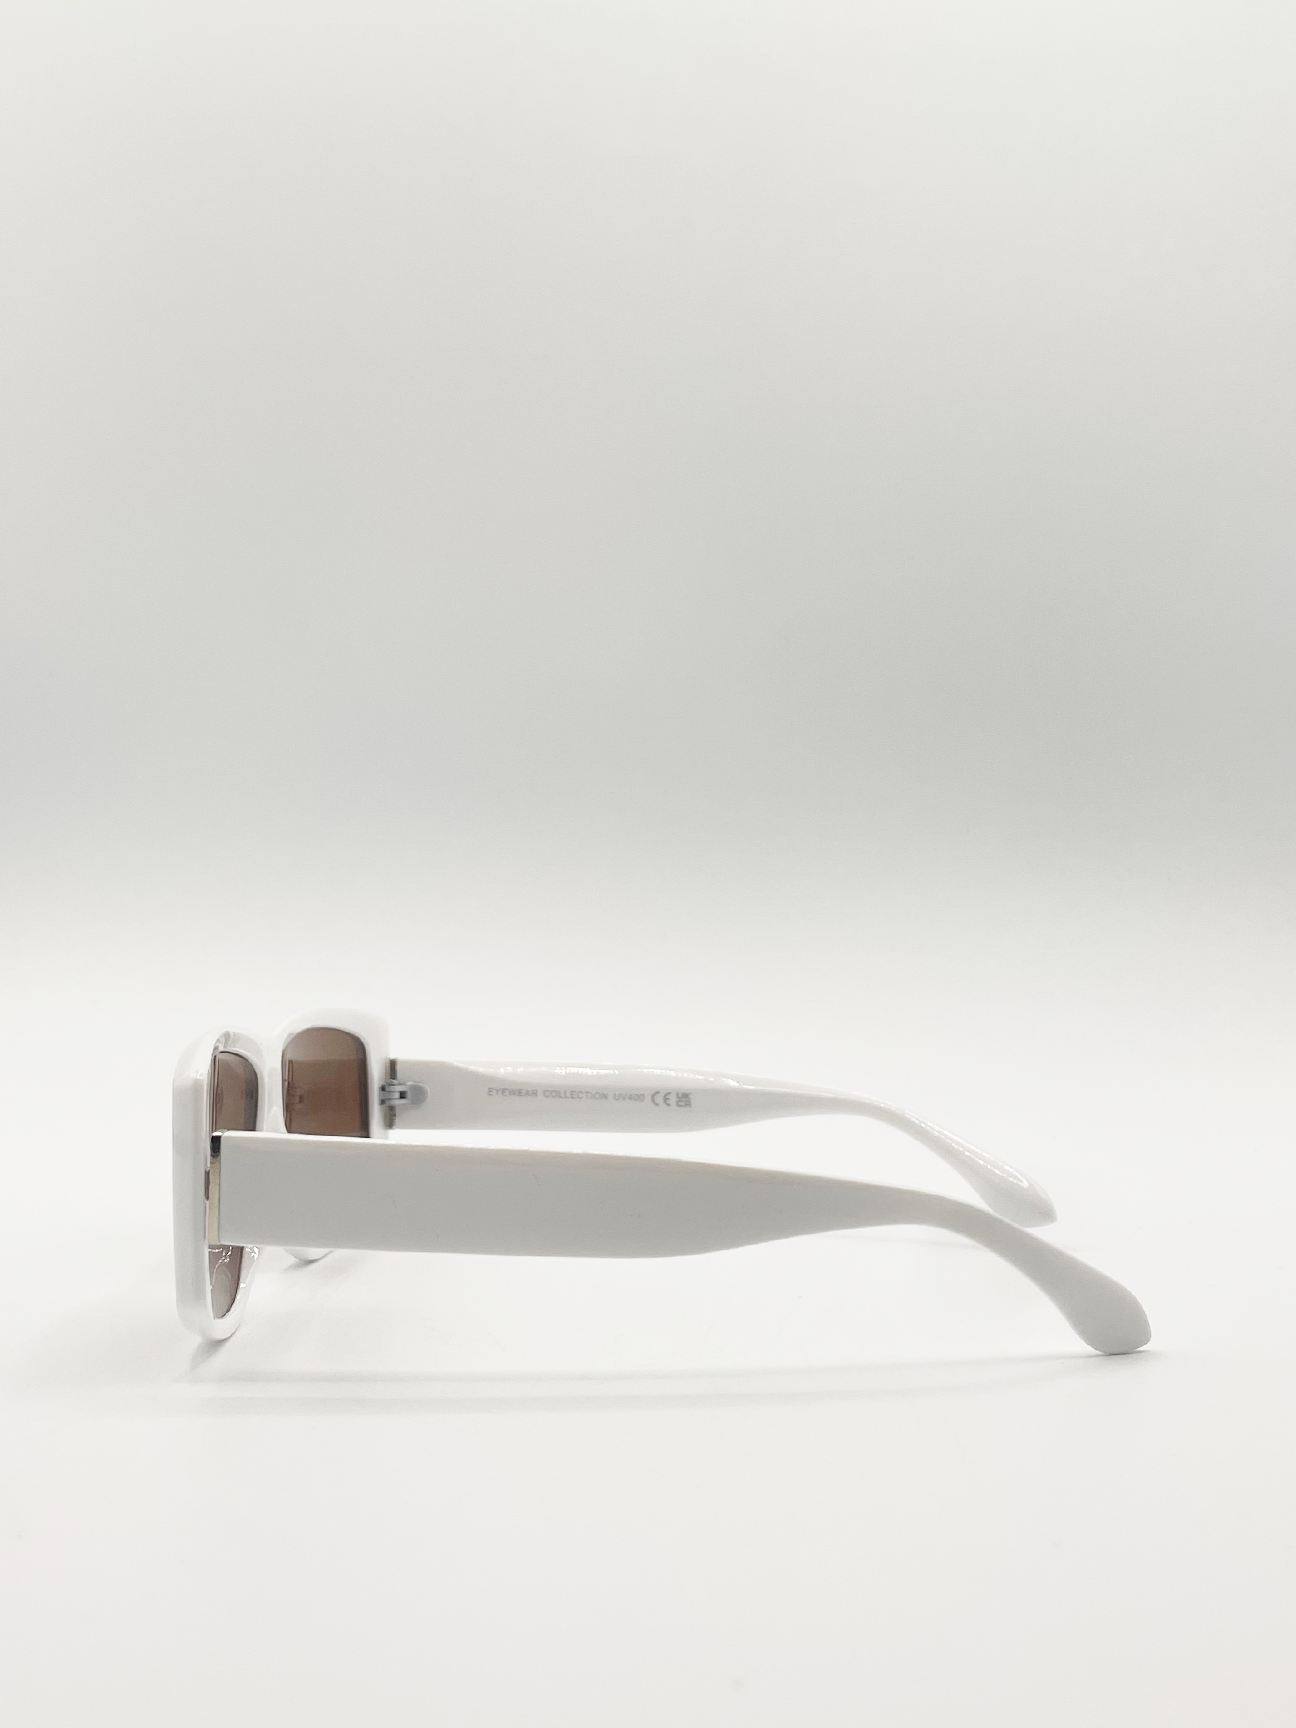 White Racer Style Sunglasses with Brown Lenses